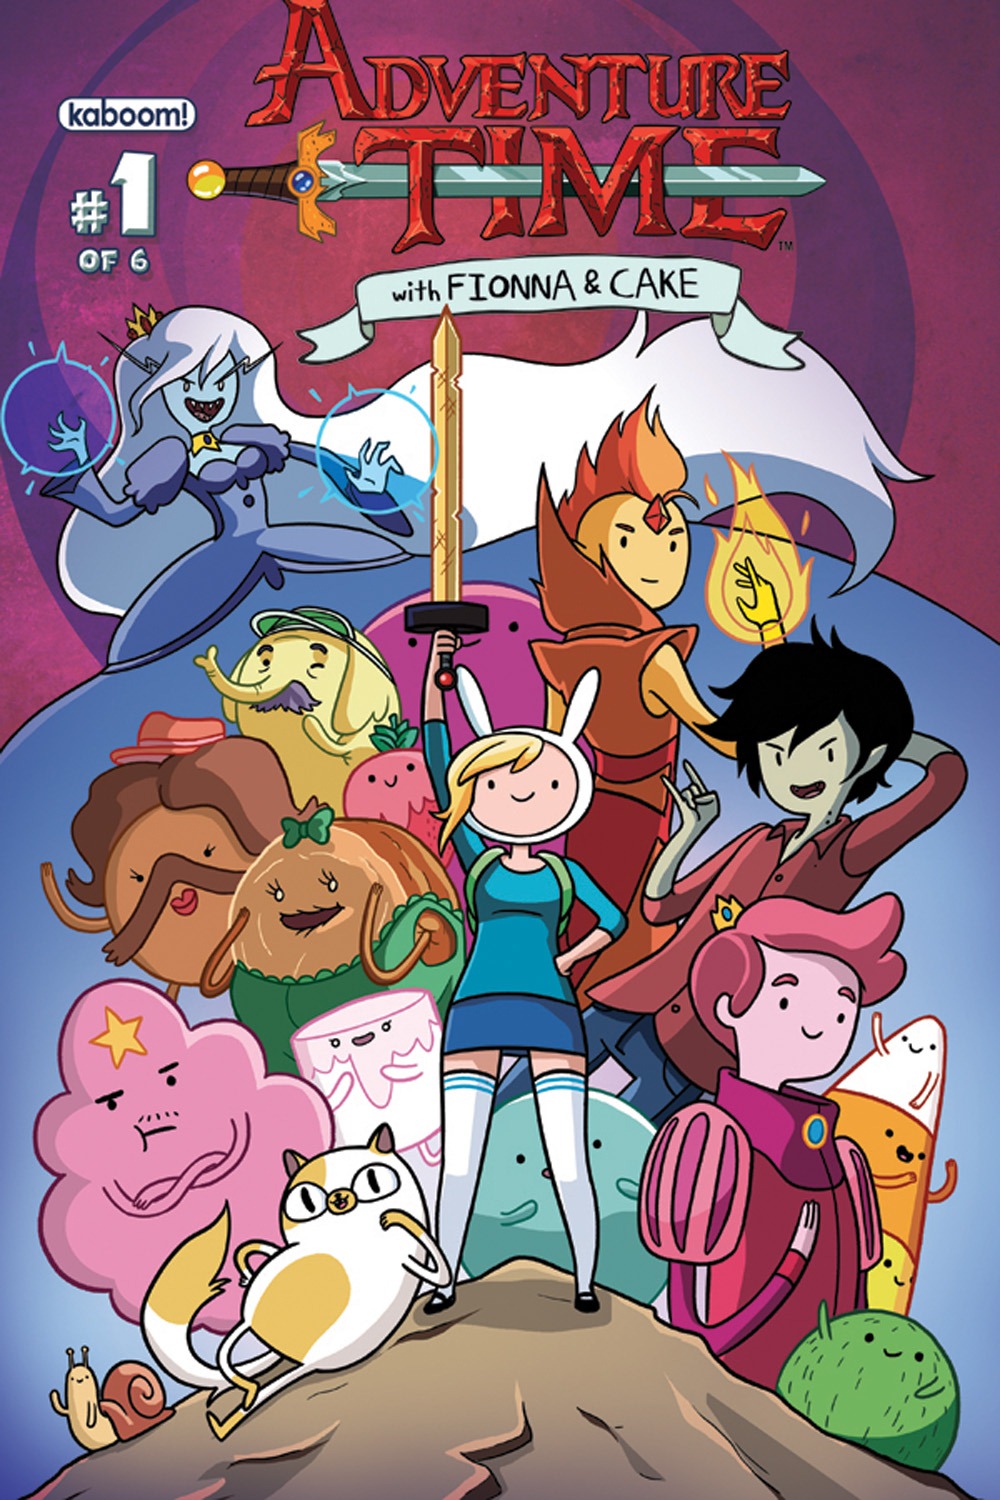 Adventure Time Fionna And Cake 1 Launches In January From Kaboom Comic Book Critic 